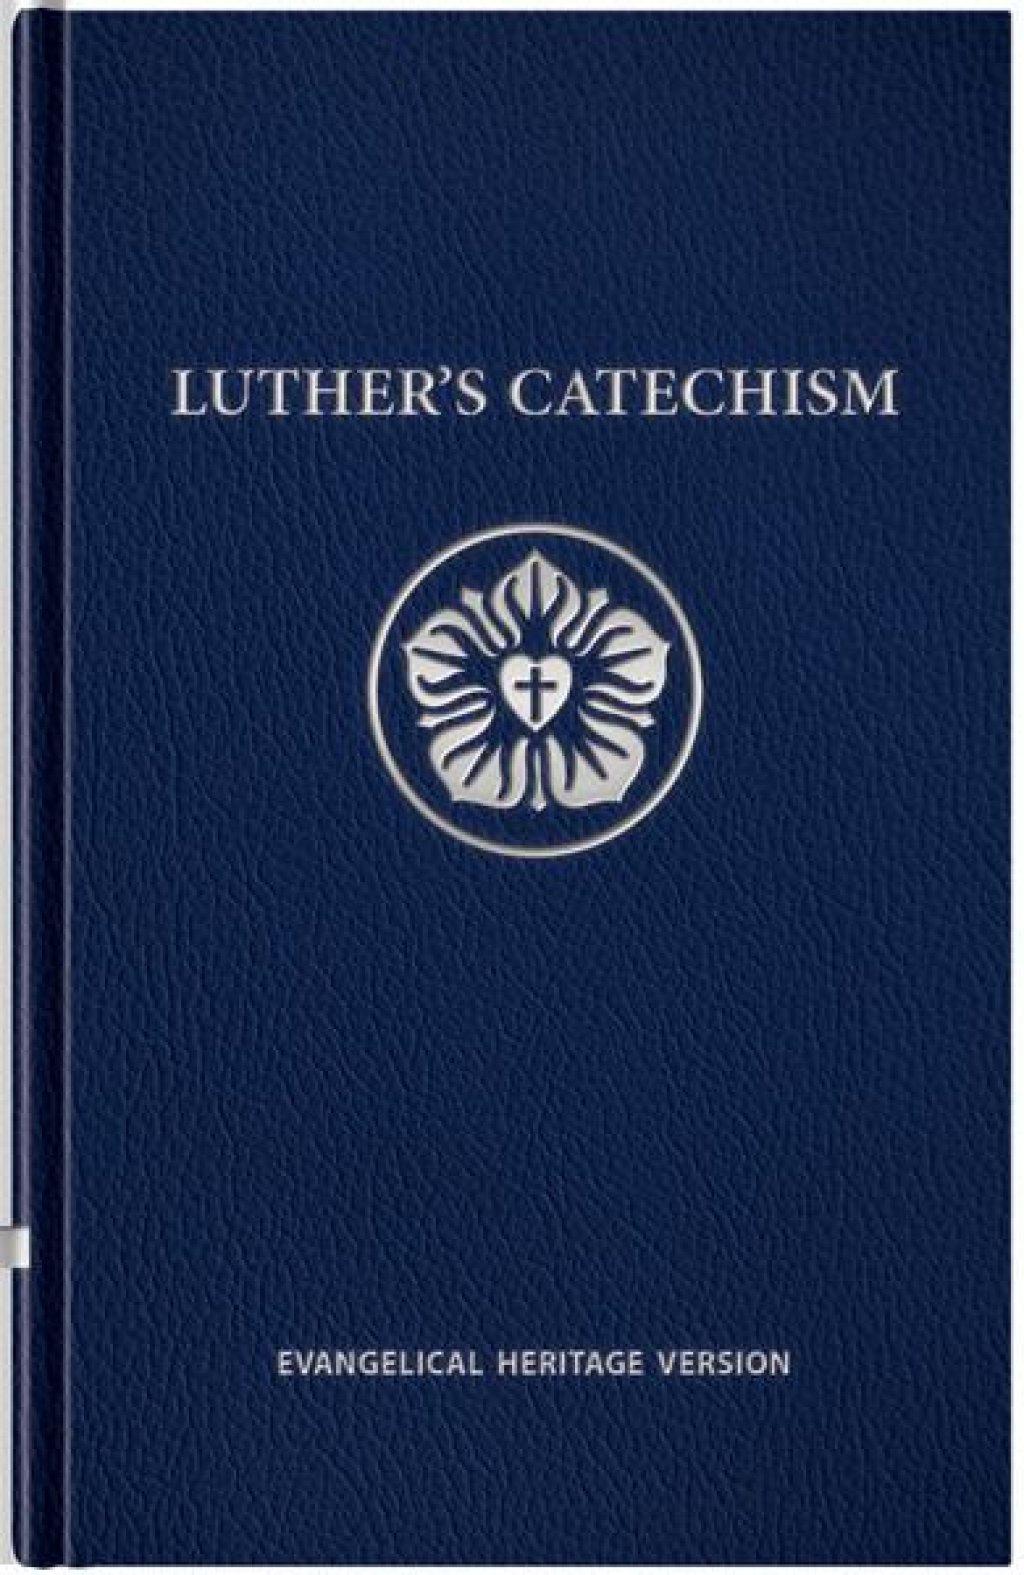 Luther's Catechism - Evangelical Heritage Version.